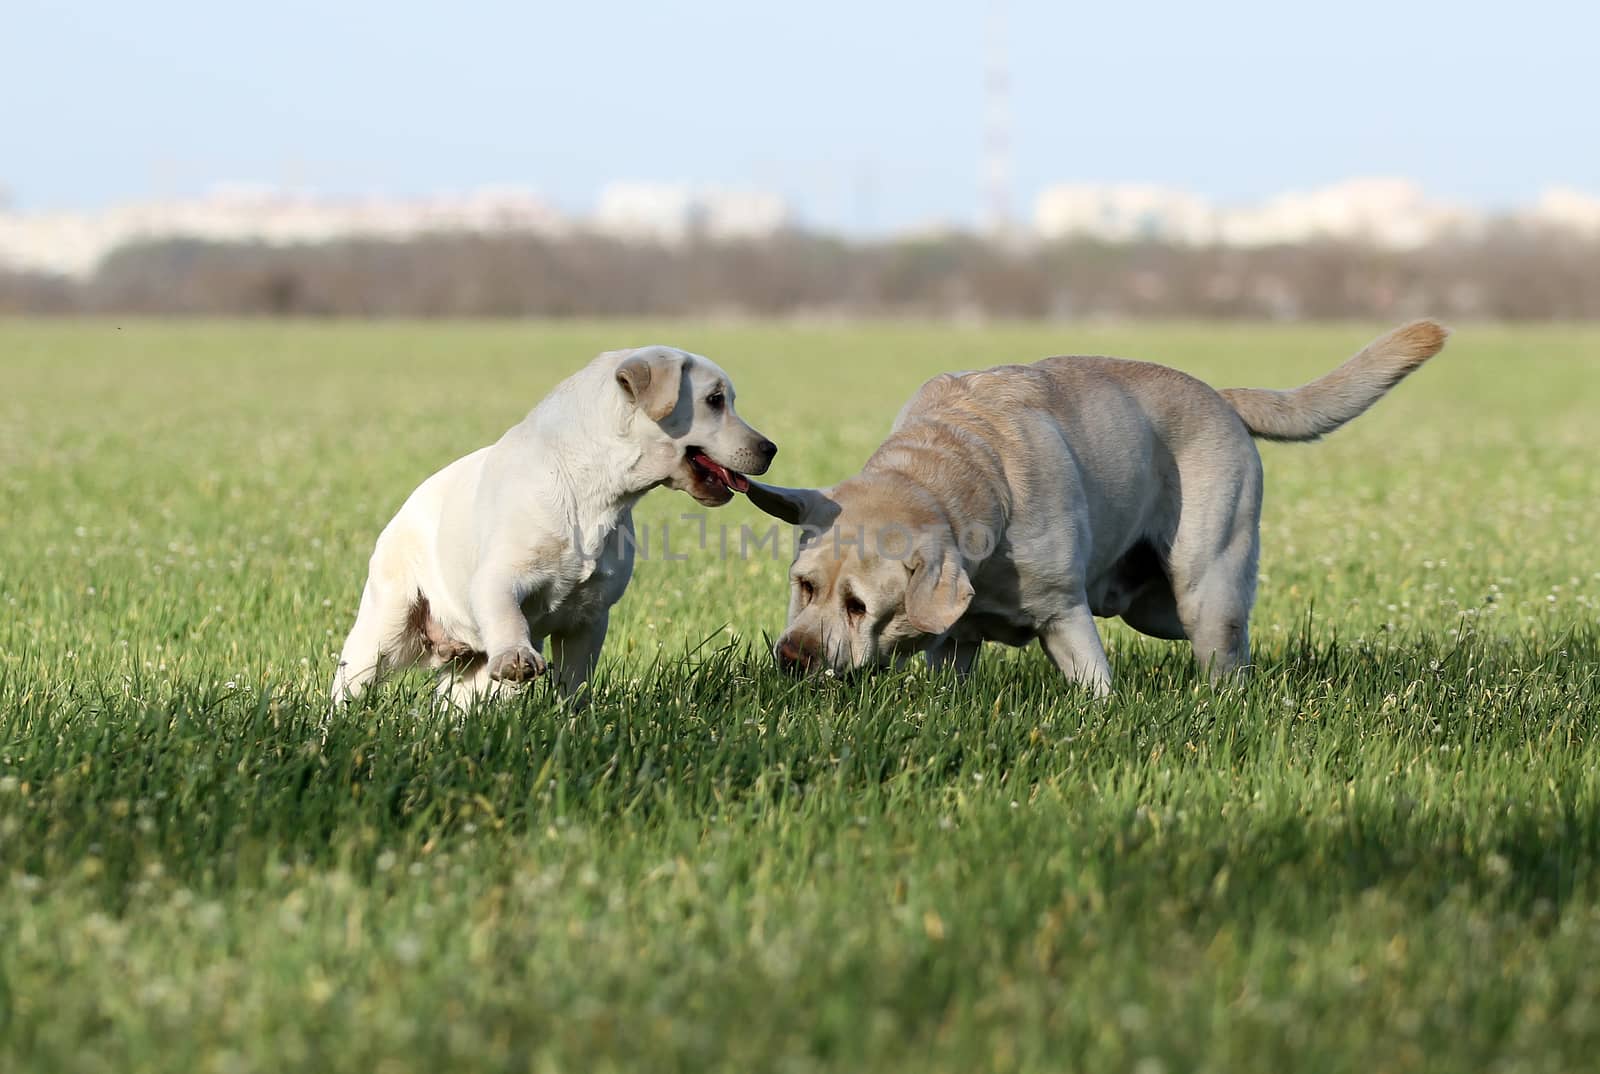 two nice sweet yellow labradors playing in the park